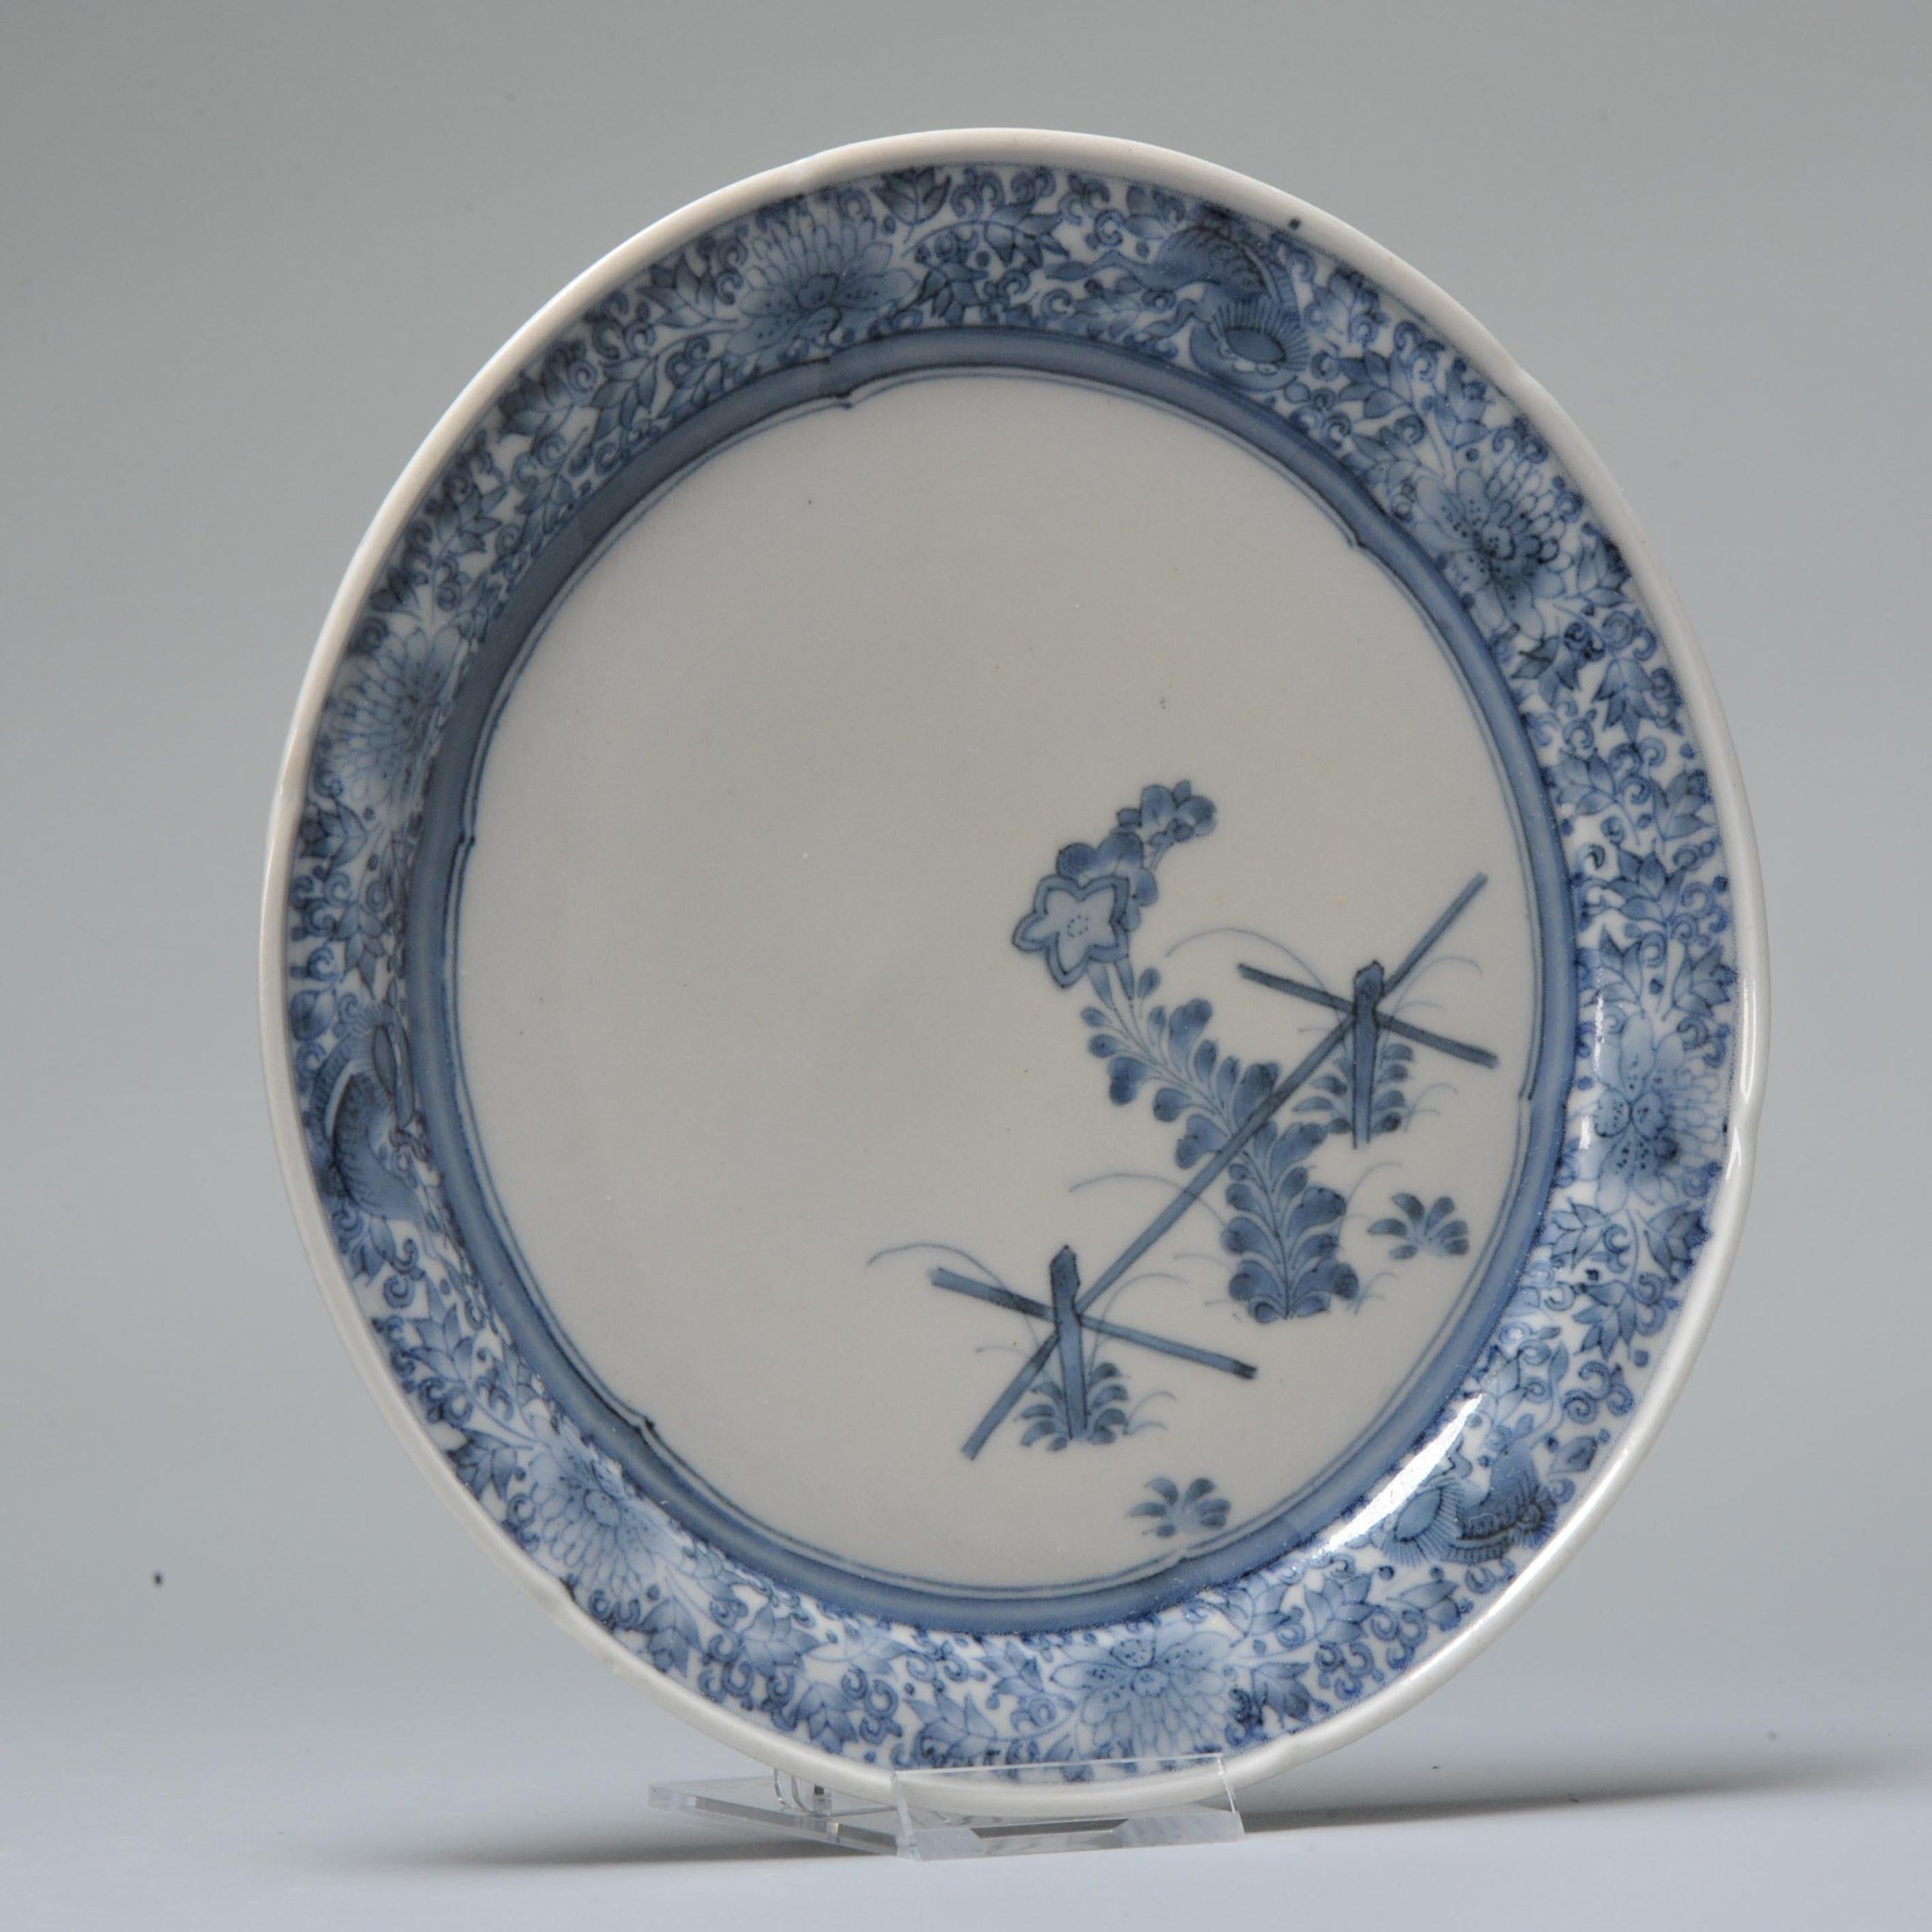 Sharing with you this very nice edo period, 1680-1710, example in perfect condition. With a garden floral scene and the border also has small Foo dogs/Qilin. Unmarked at the base.

Additional information:
Material: Porcelain & Pottery
Category: